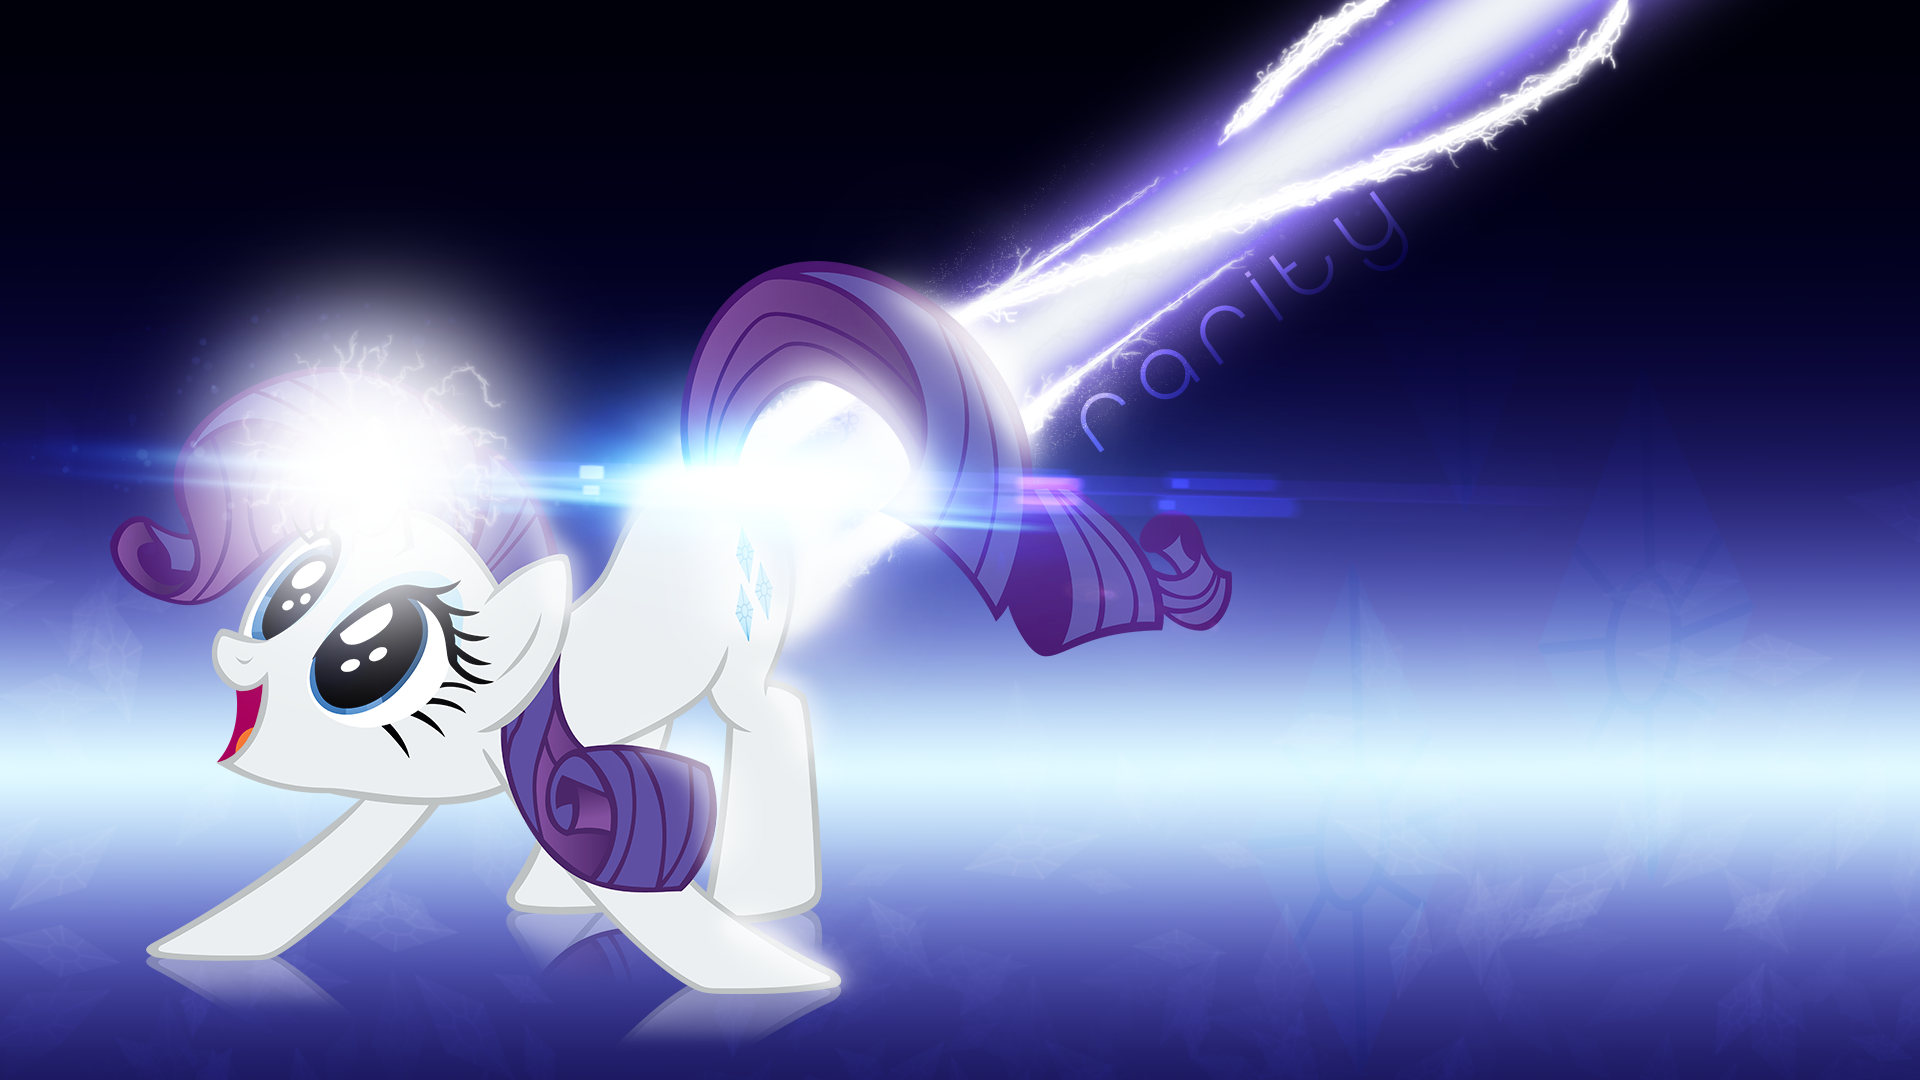 Rarity's Colon Cannon by BlackGryph0n, dadio46 and goldenacorn93